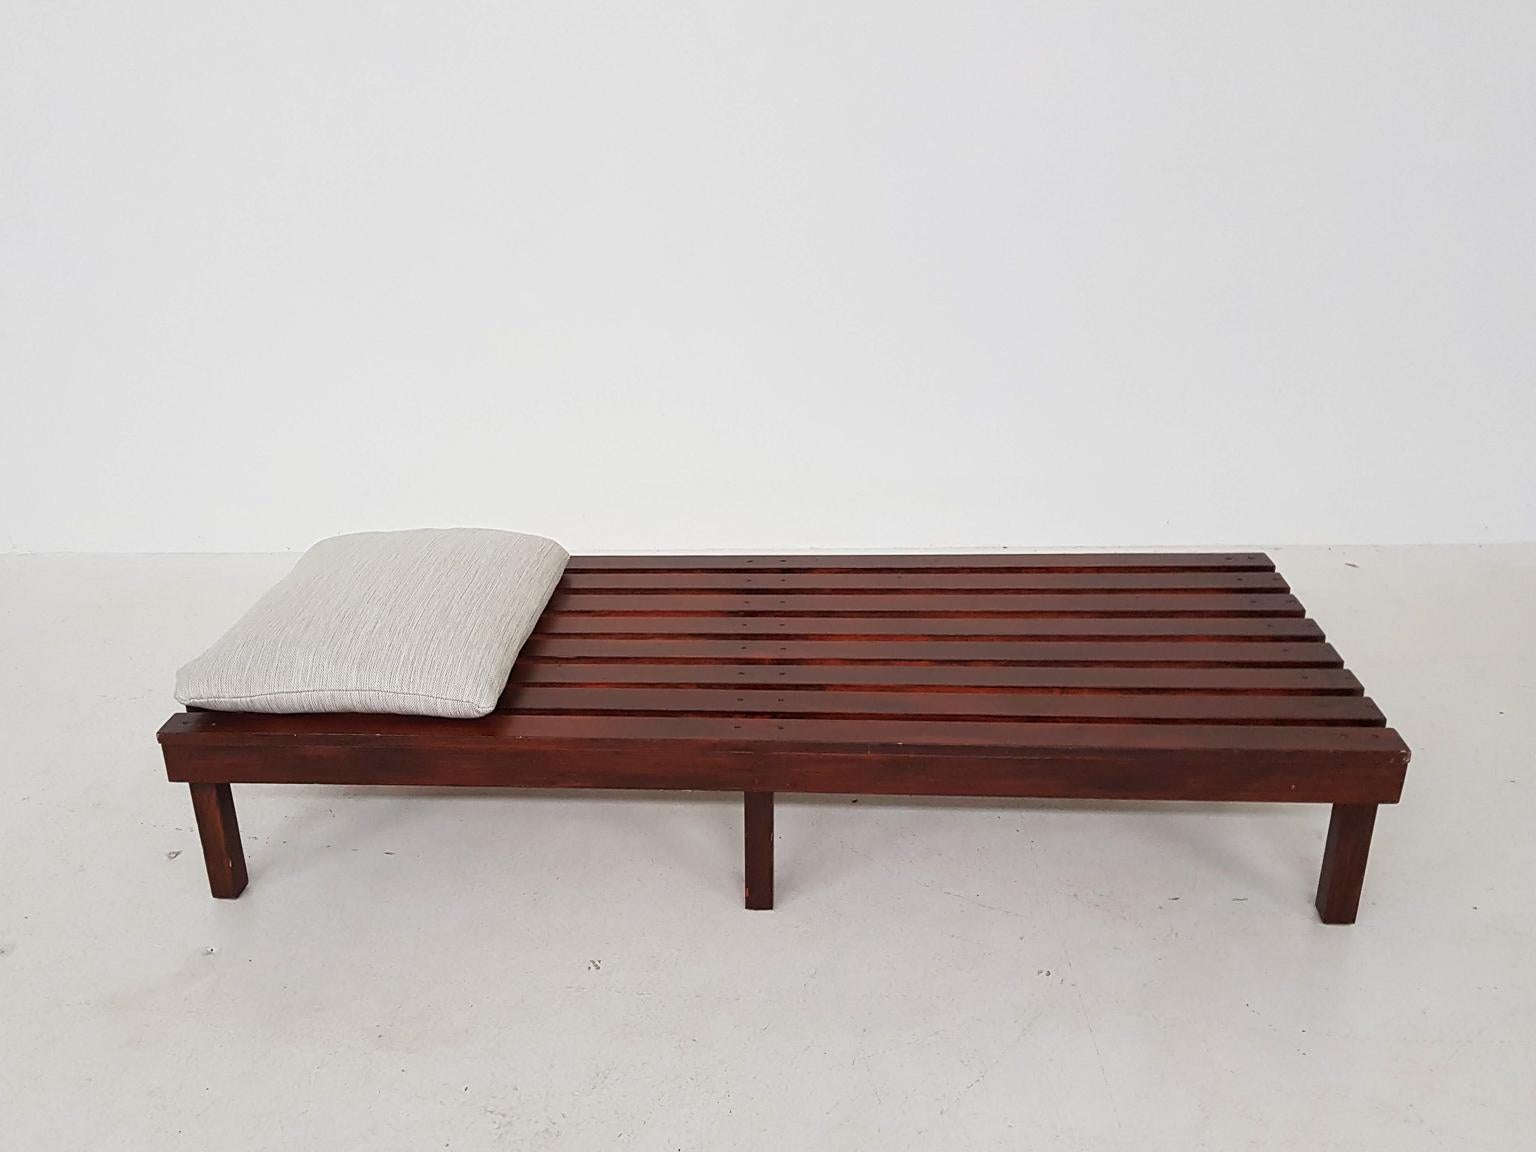 Minimalist Martin Visser or Charlotte Perriand Style Slat Bench or Daybed, Dutch, 1950s